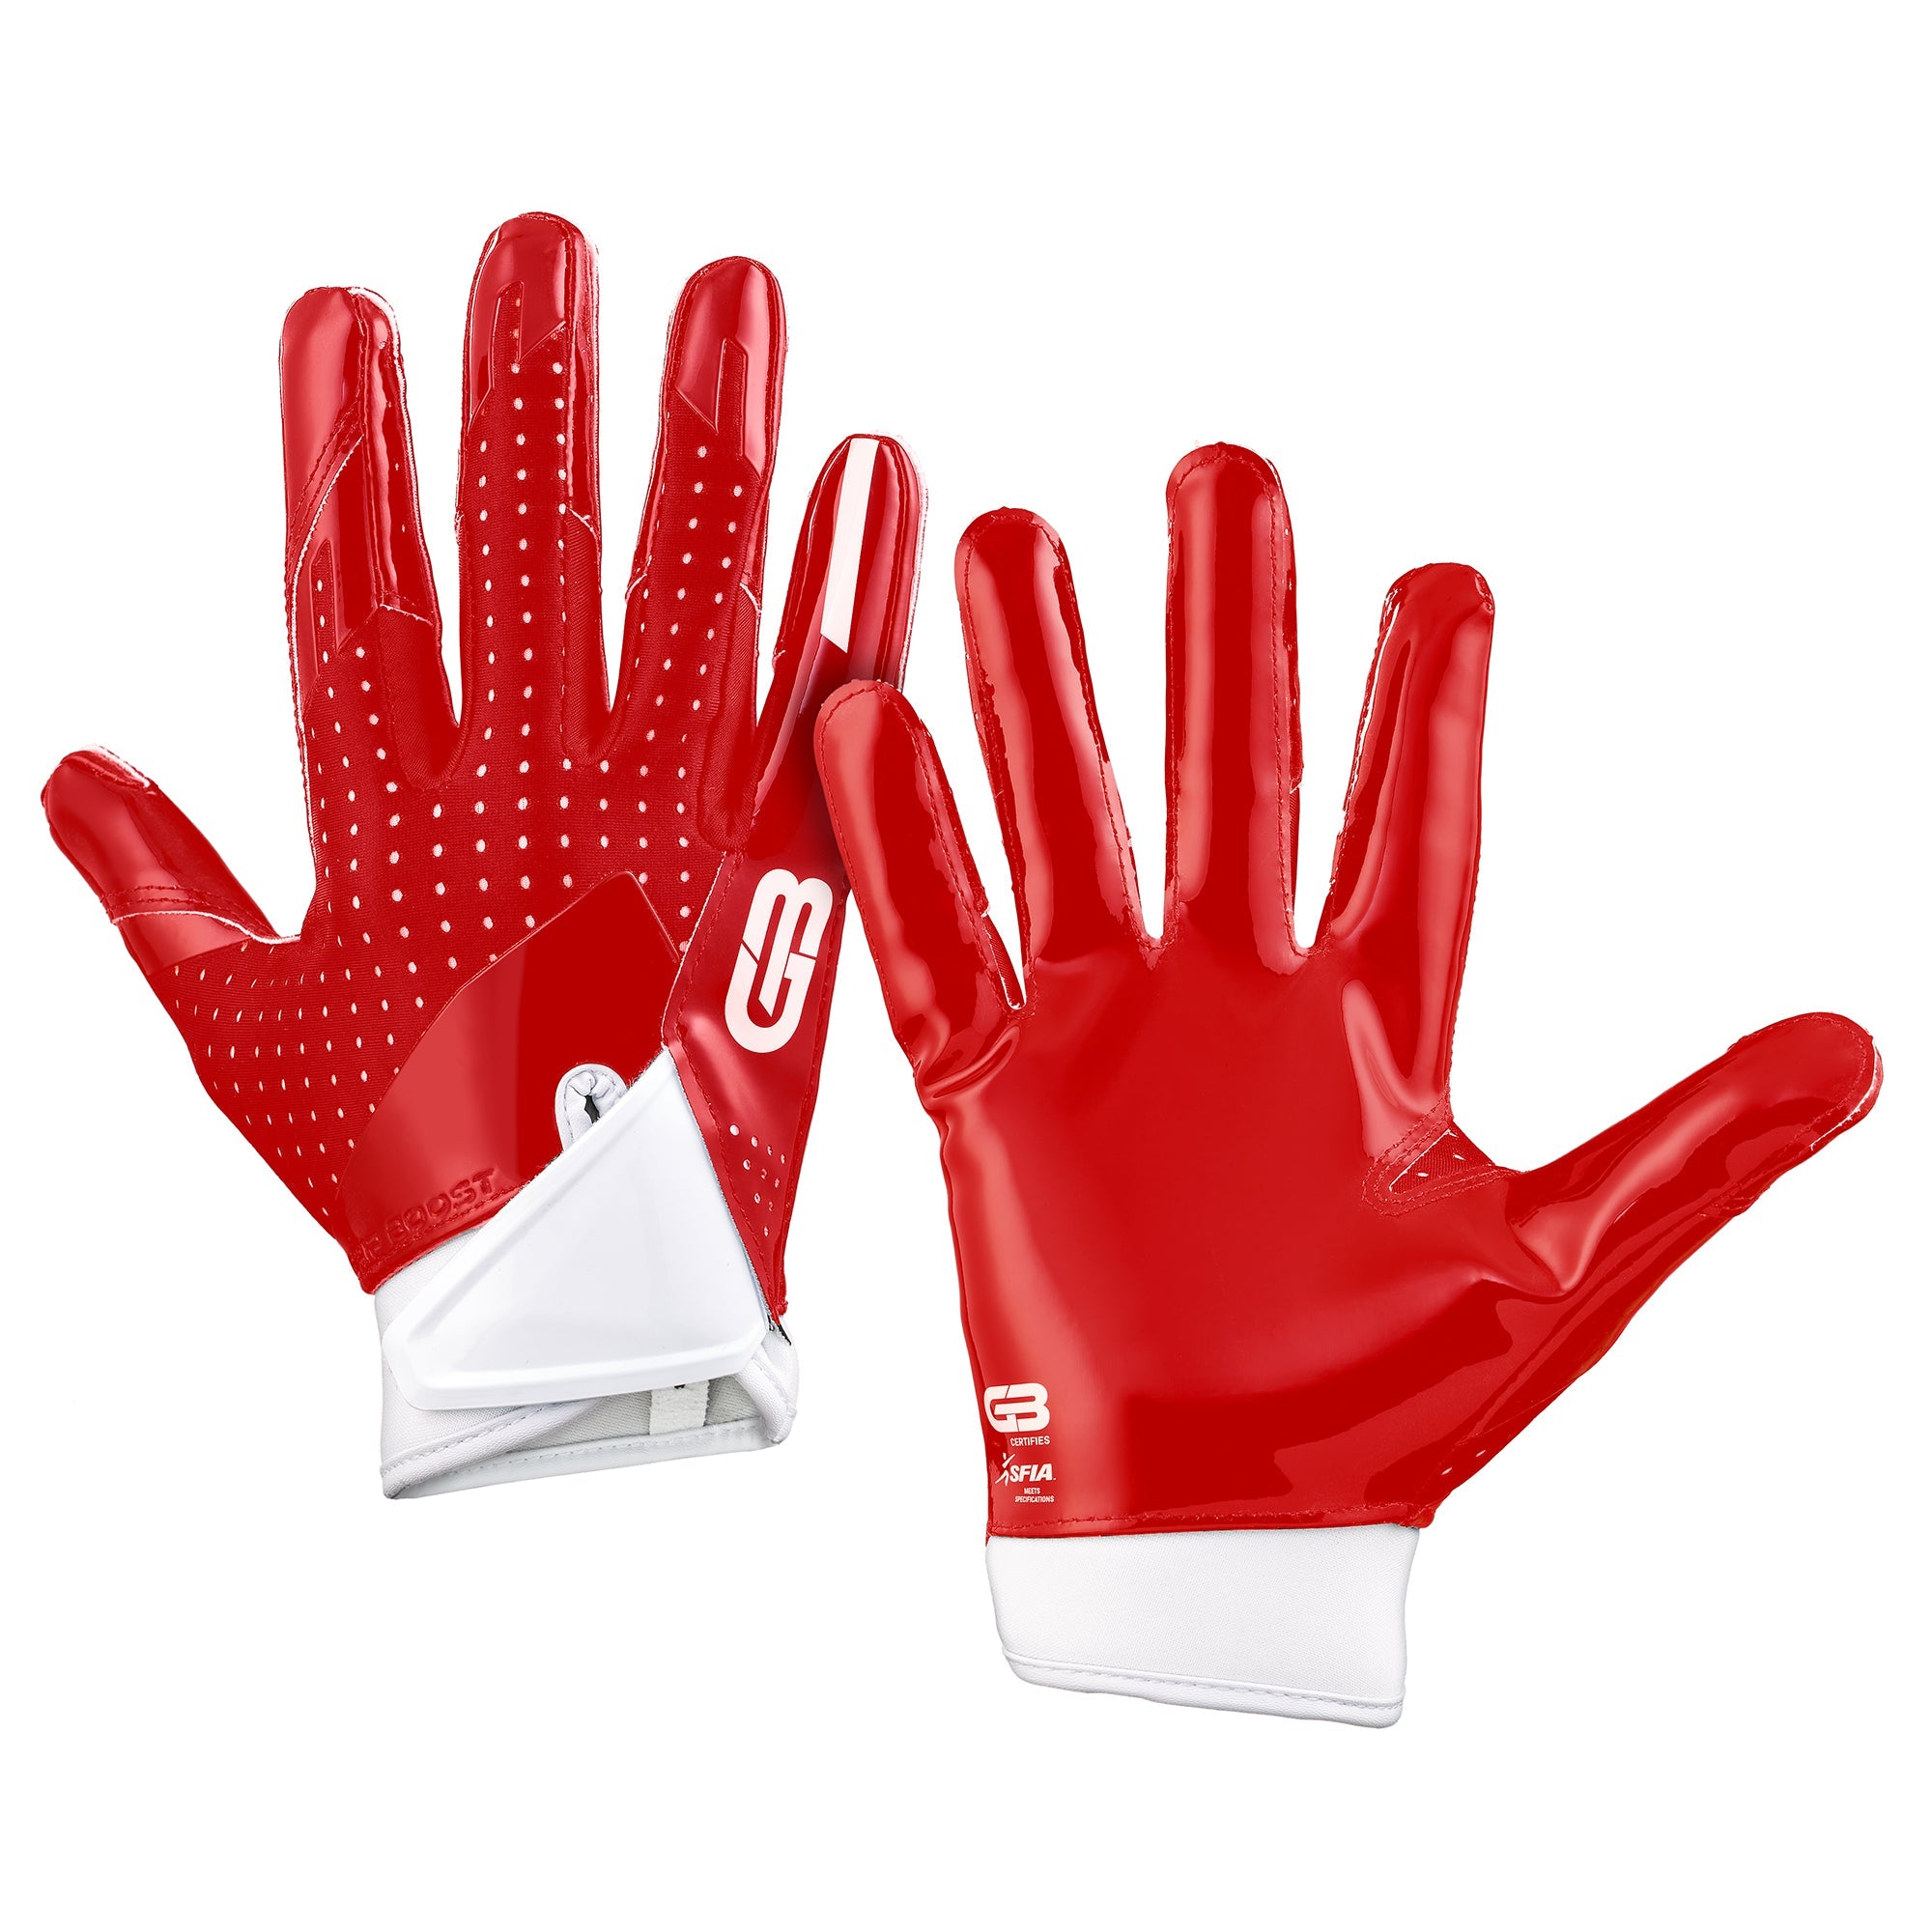 Solid Football Gloves - Grip Boost